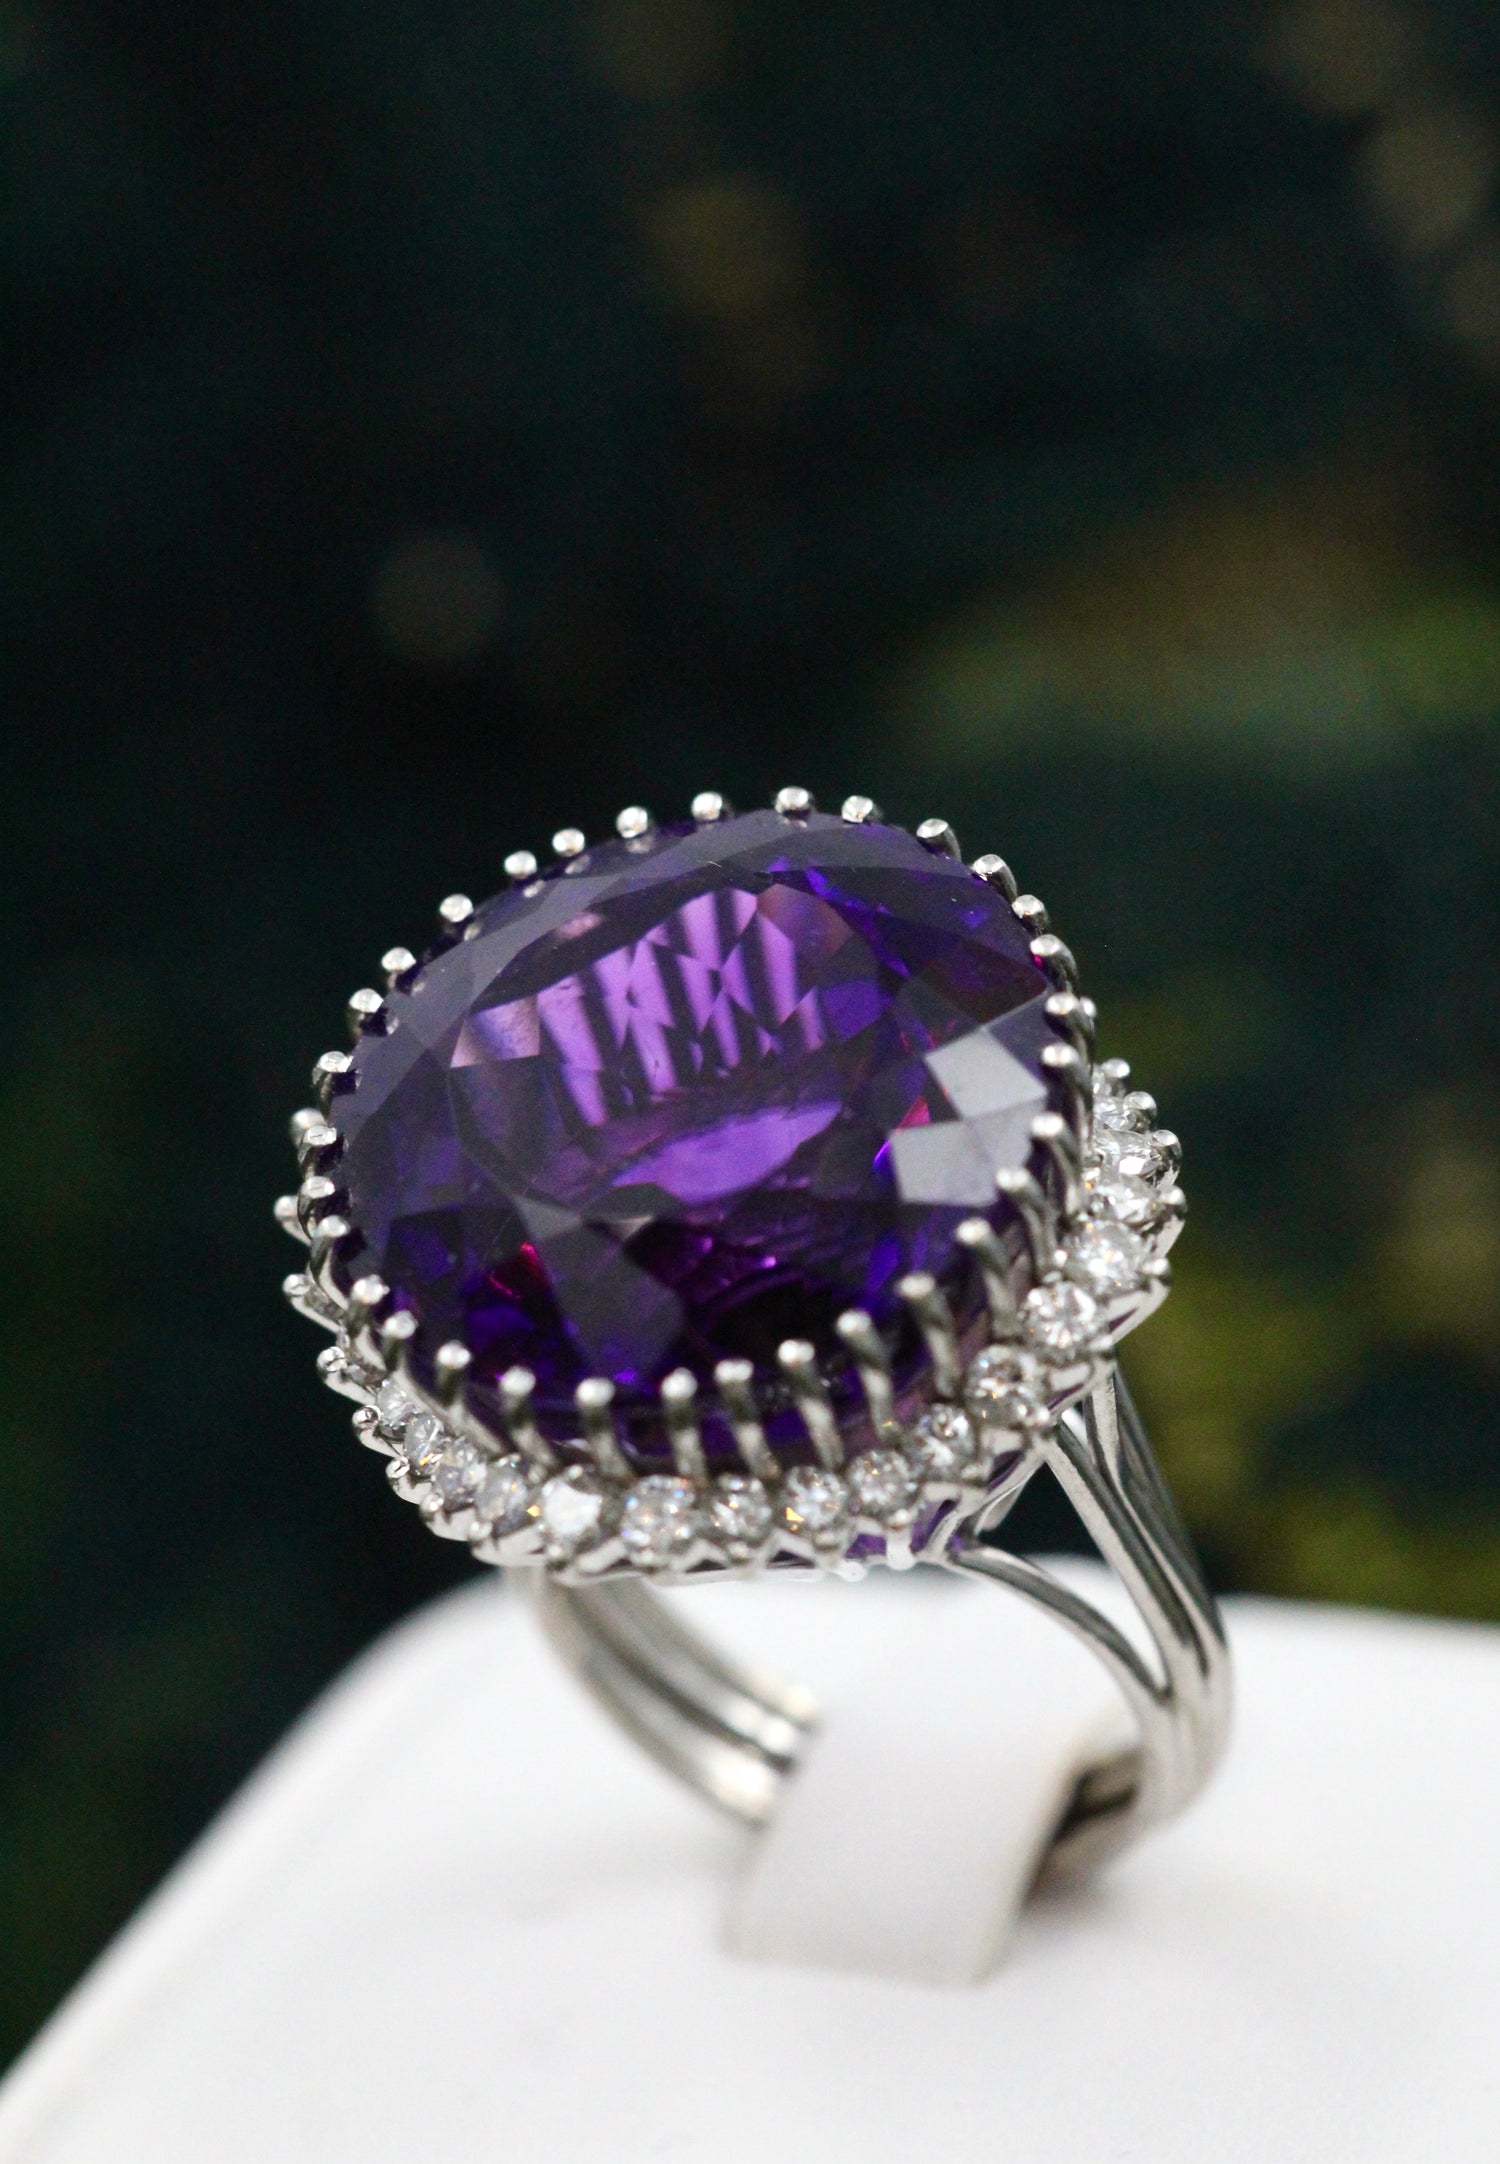 A very fine Amethyst and Diamond Cocktail Ring in 18ct. White Gold (tested).  Late 20th Century (pre-owned) - Robin Haydock Antiques